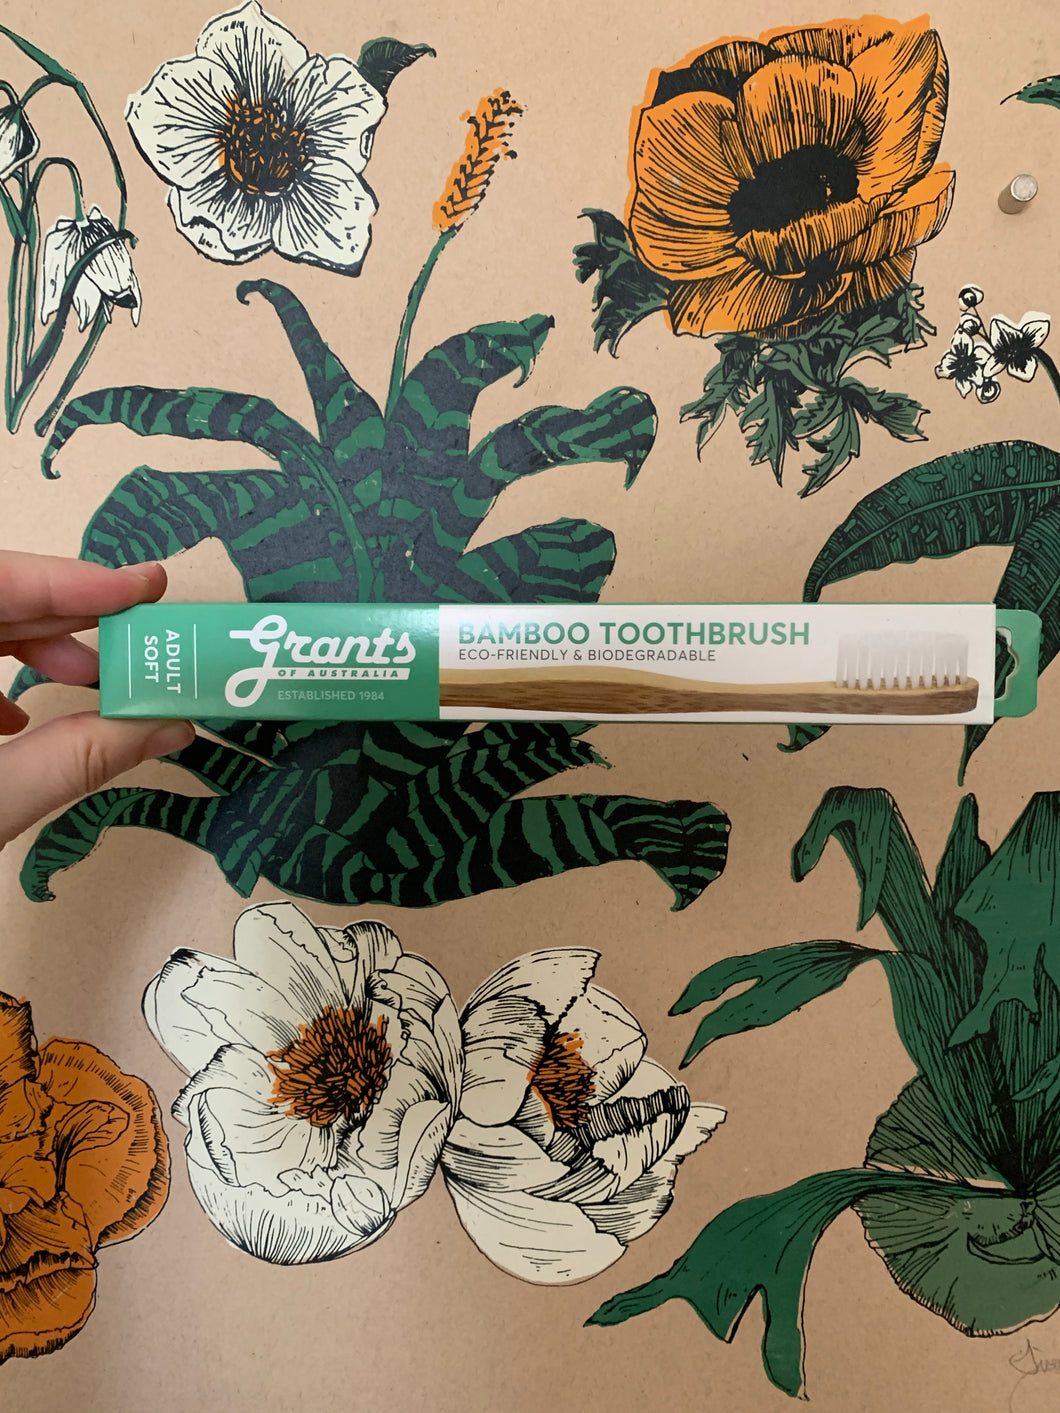 Grants Bamboo Toothbrush: Adult, soft